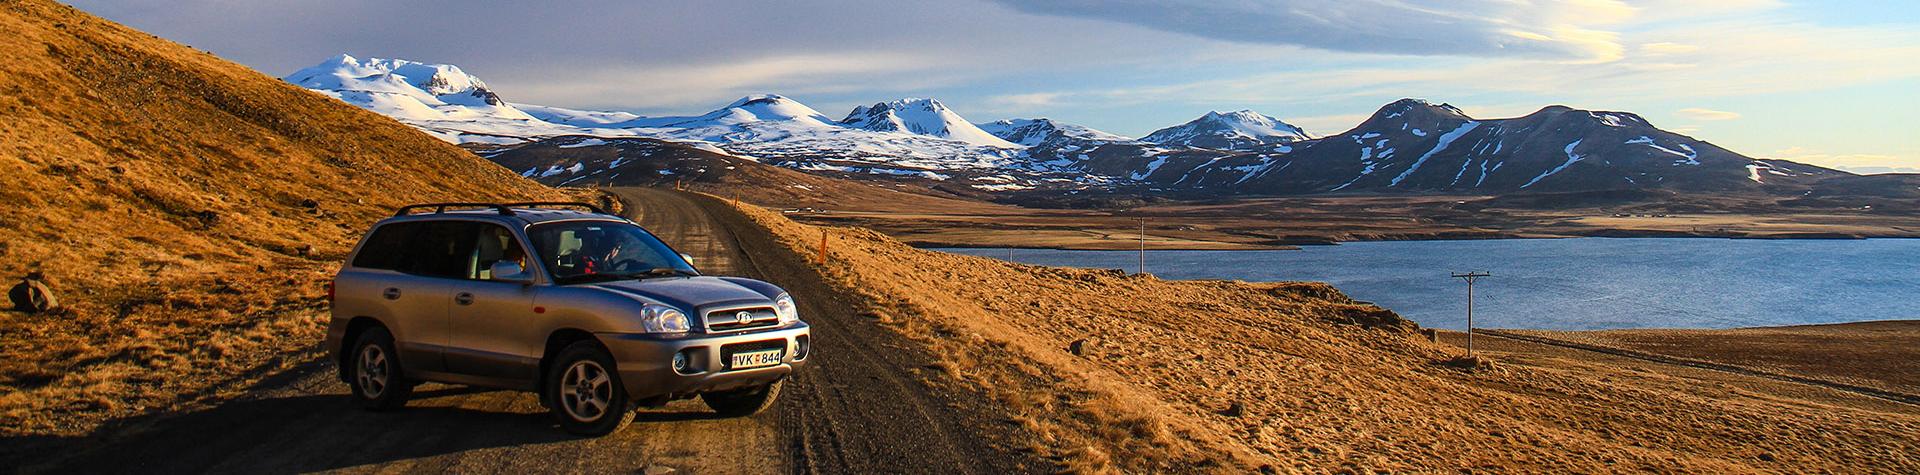 Iceland Self Drive Tours: Driving rental car in the Iceland. 